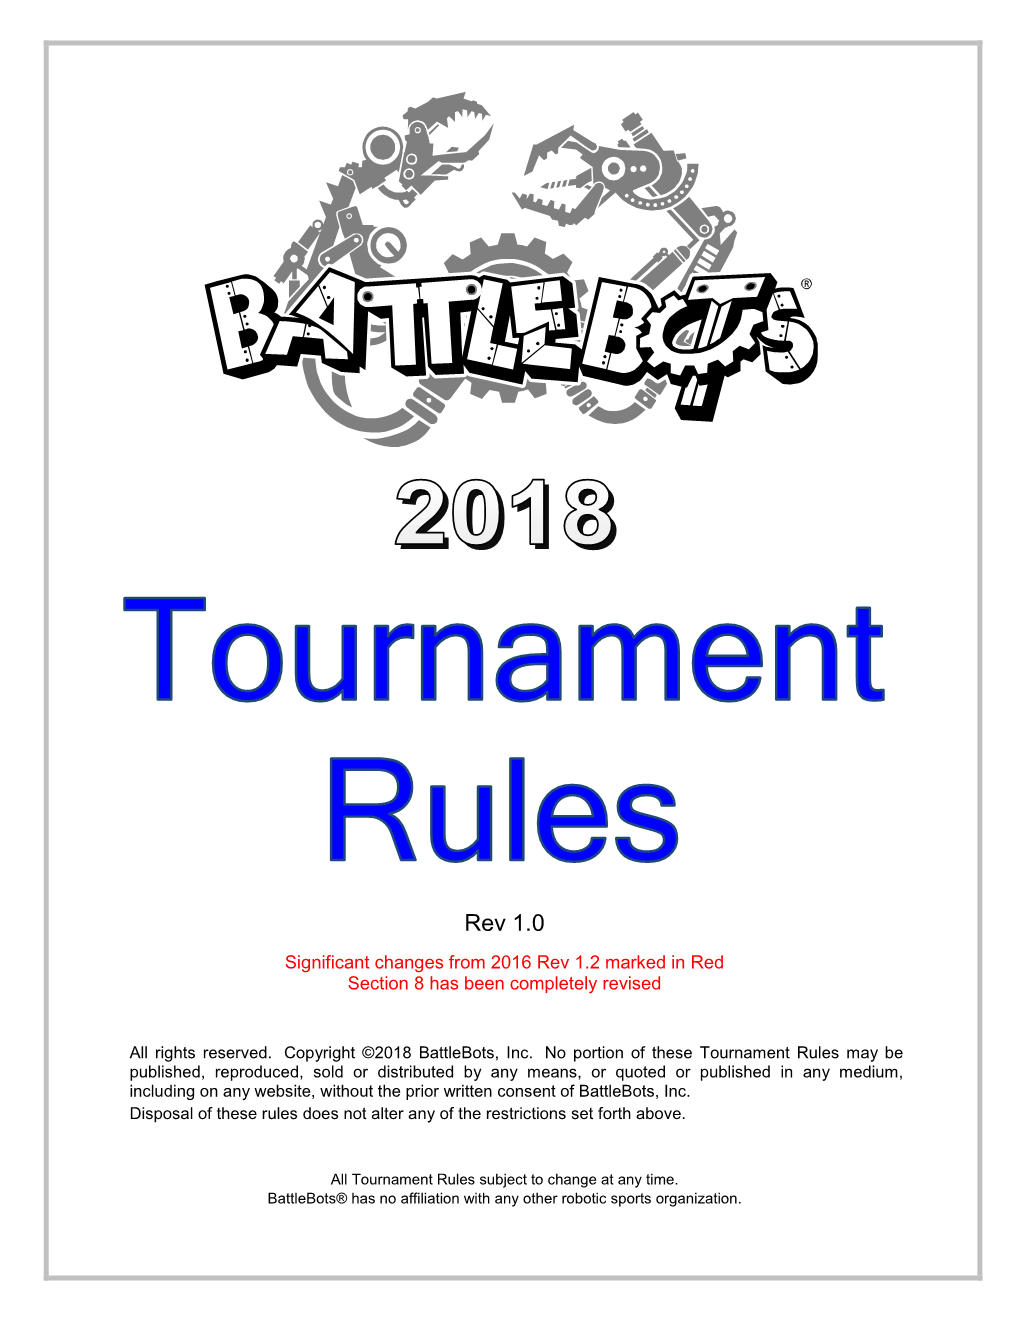 Battlebots Tournament Rules (“Tournament Rules”) That Define the Operational Rules for a Safe, Fair and Efficient Tournament